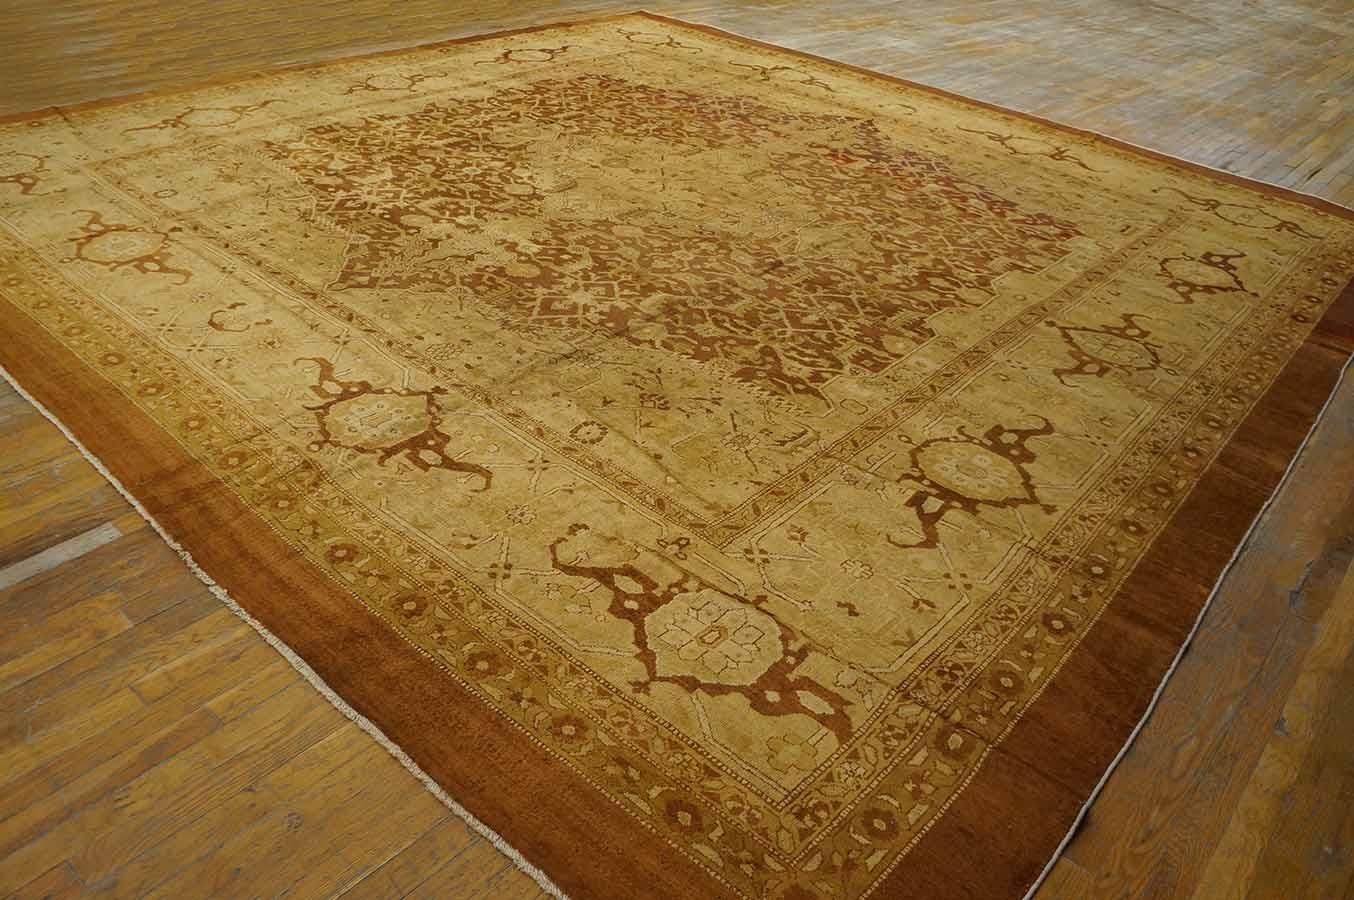 Early 20th Century N. Indian Agra Carpet ( 14' X 14' - 427 x 427 )
Every Persian design was interpreted in Agra and this c. 1900 carpet draws on the best sources: cloud bands, curved leaves, turtle palmette border. The mahogany brown field is found